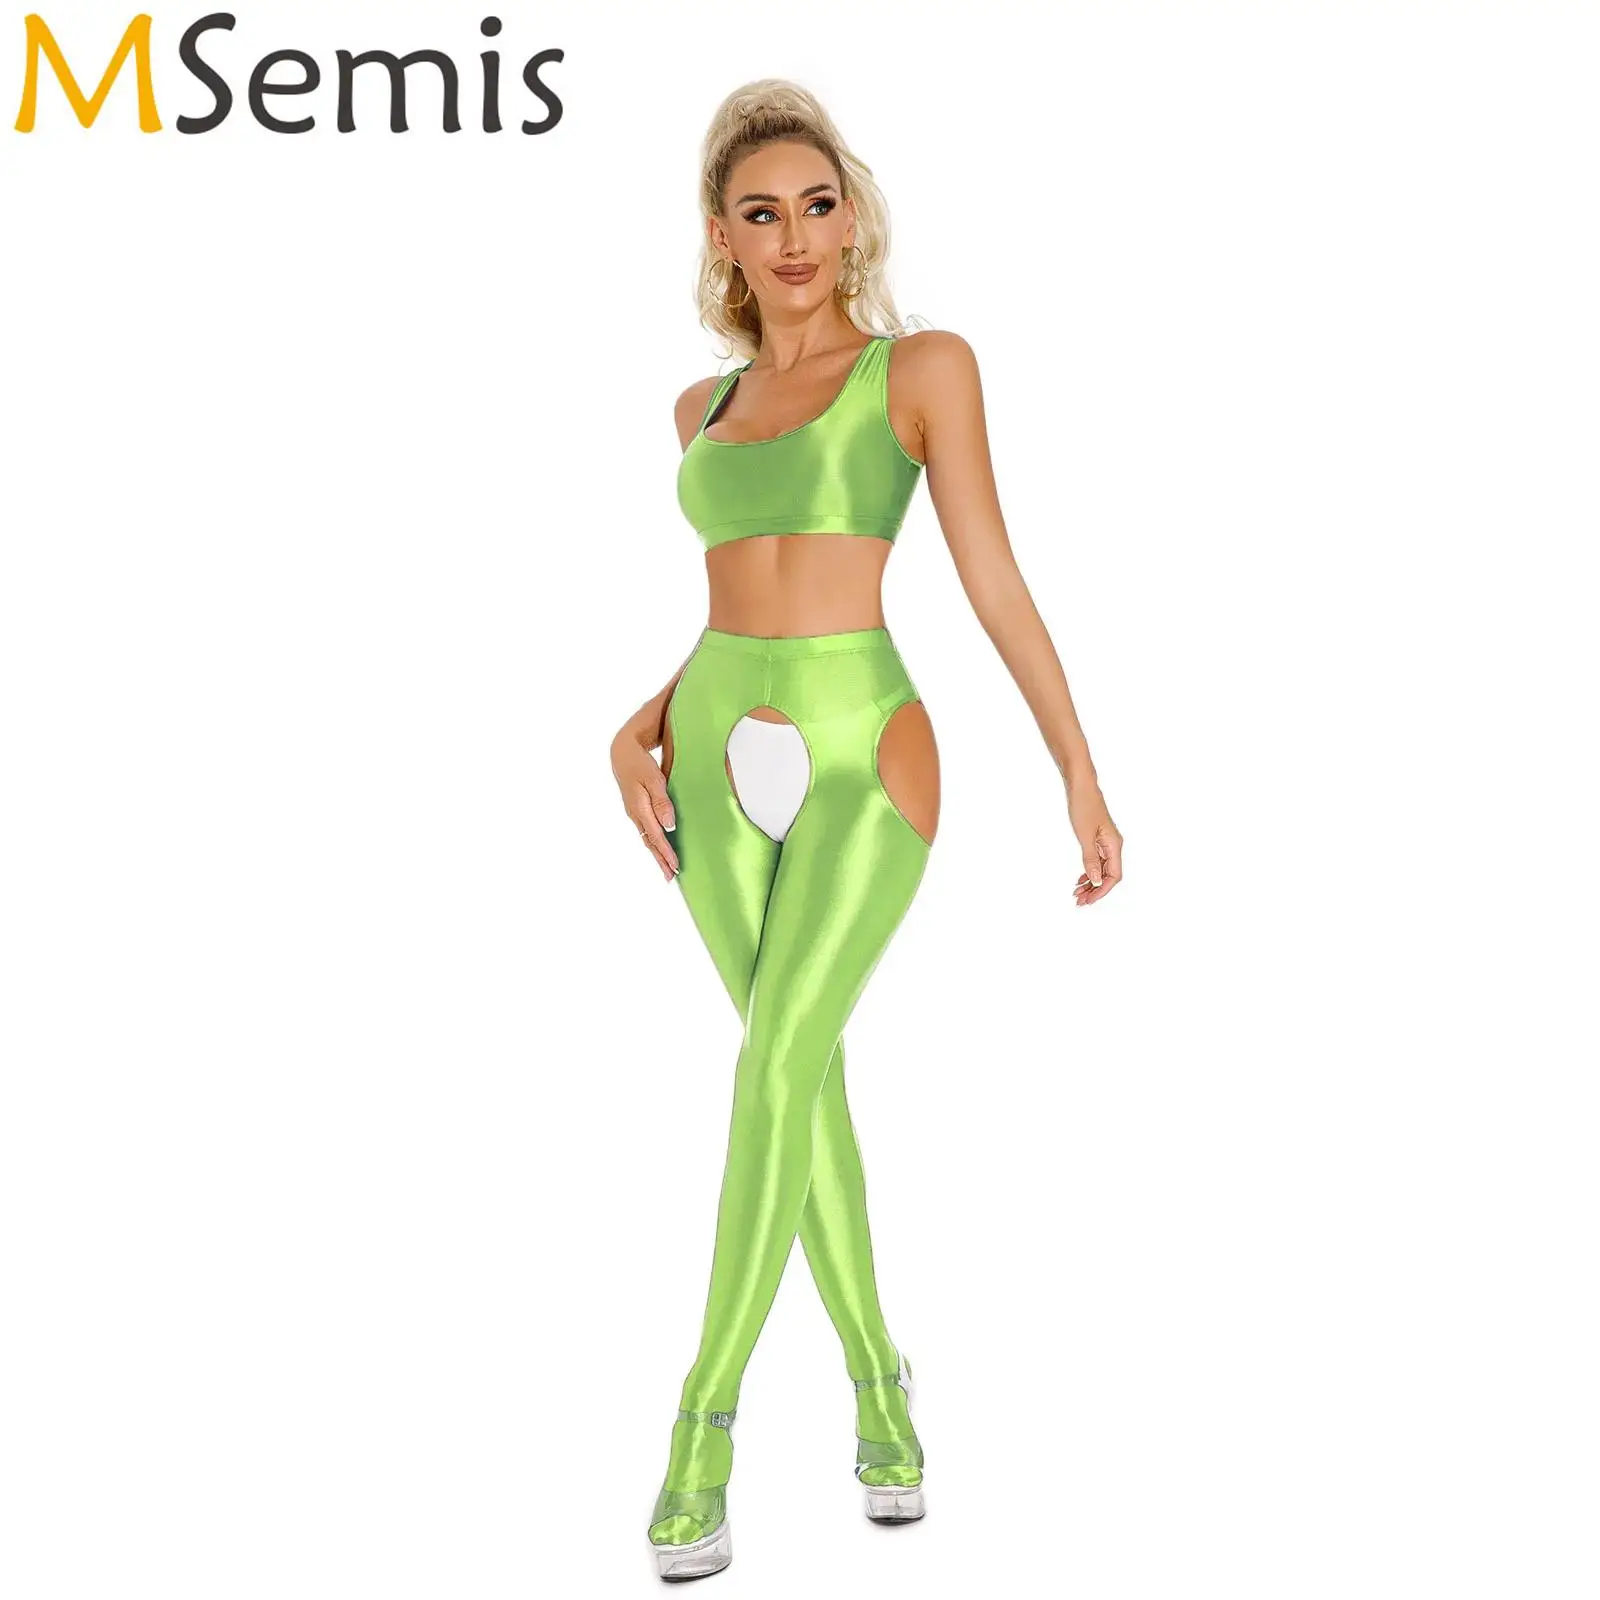 

Womens Oil Glossy Crotchless Lingerie Suit Sleeveless U Neck Racerback Crop Top with Side Cutout Leggings Open Crotch Pantyhose